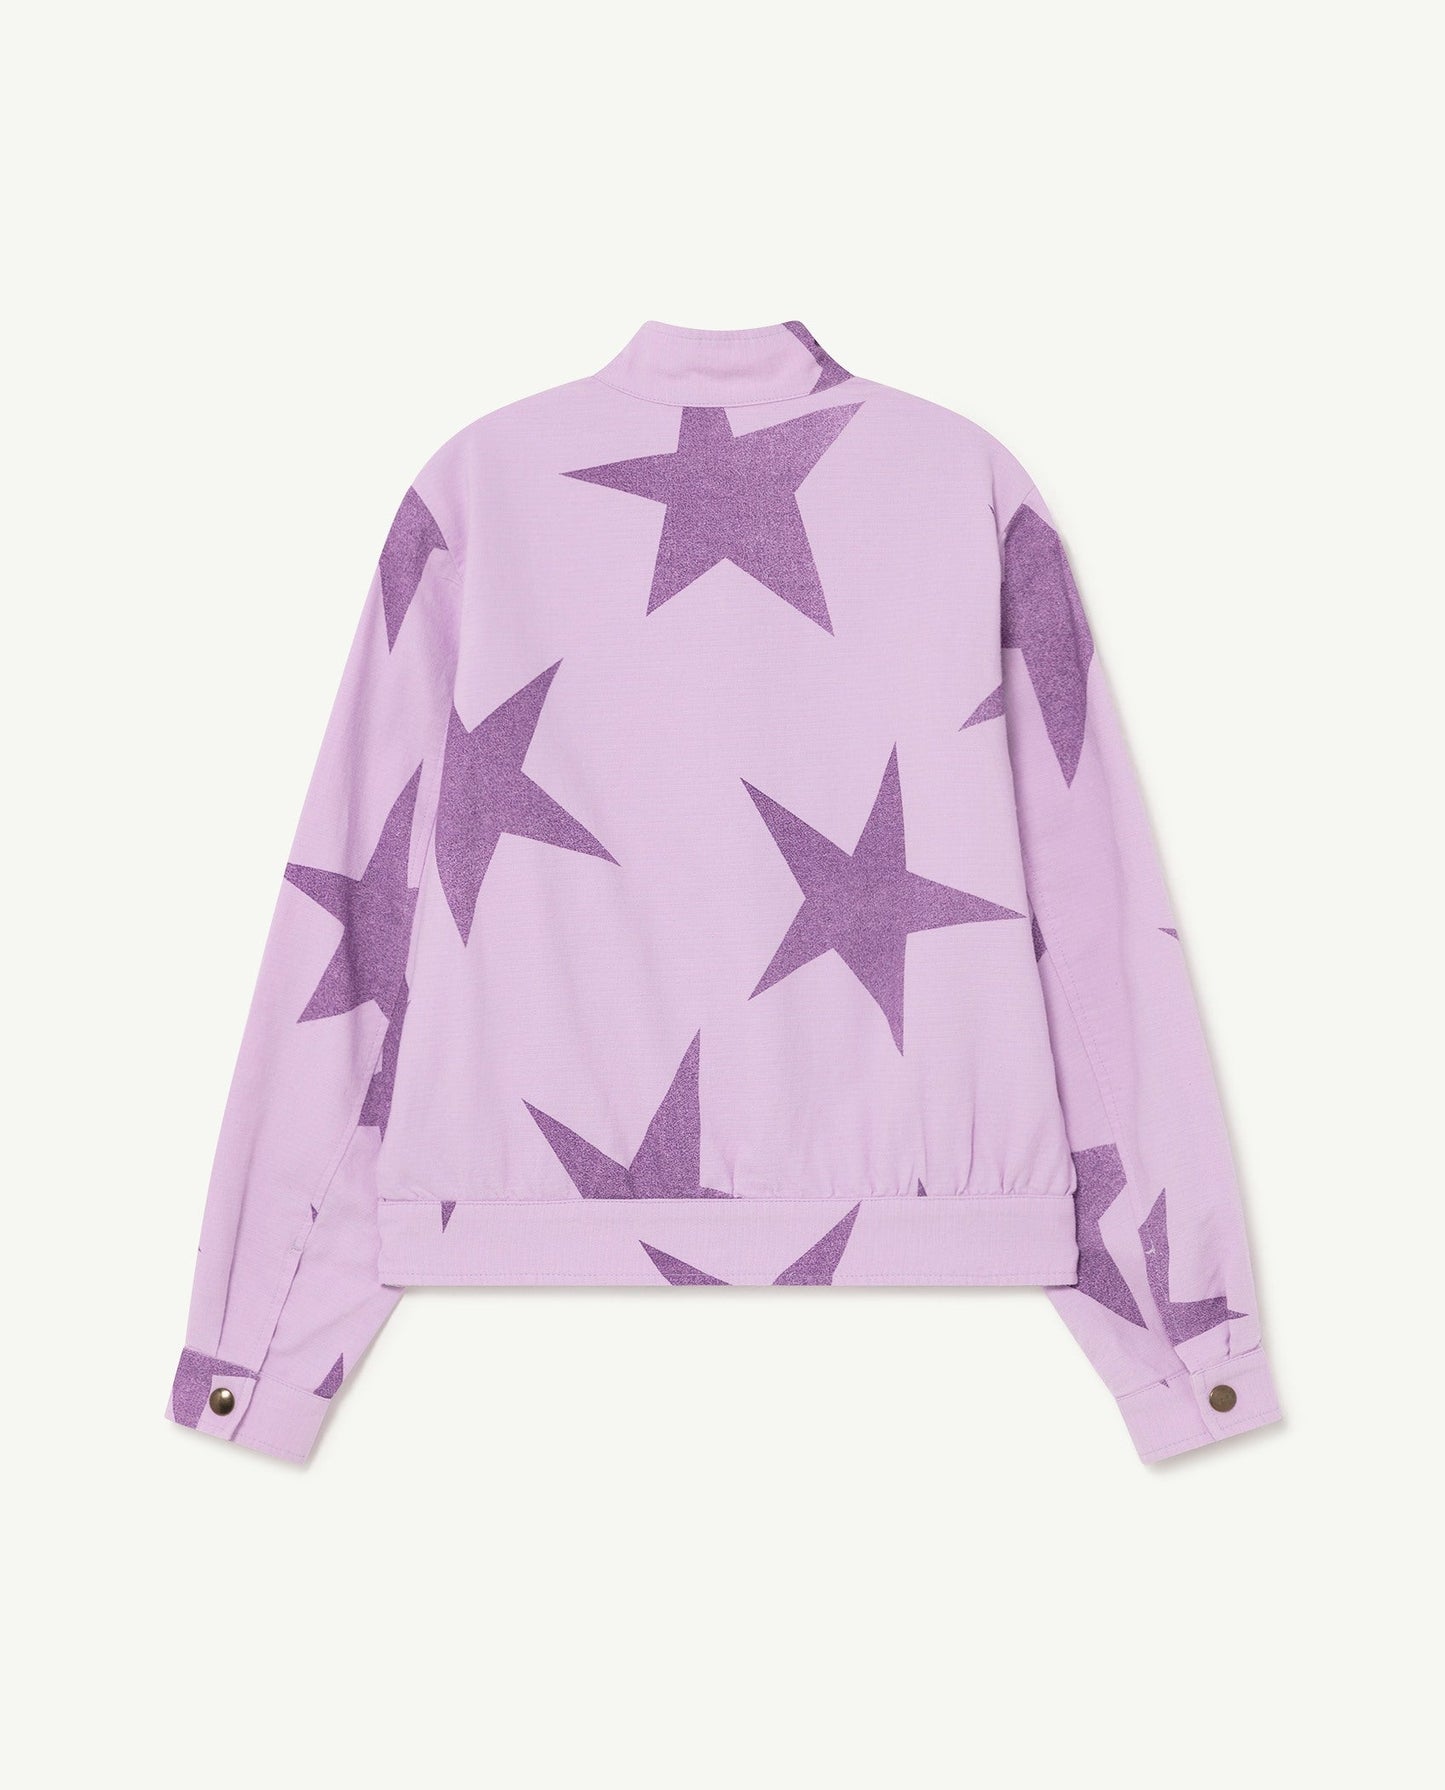 Tiger jacket Lilac Stars Outerwear The Animals Observatory 